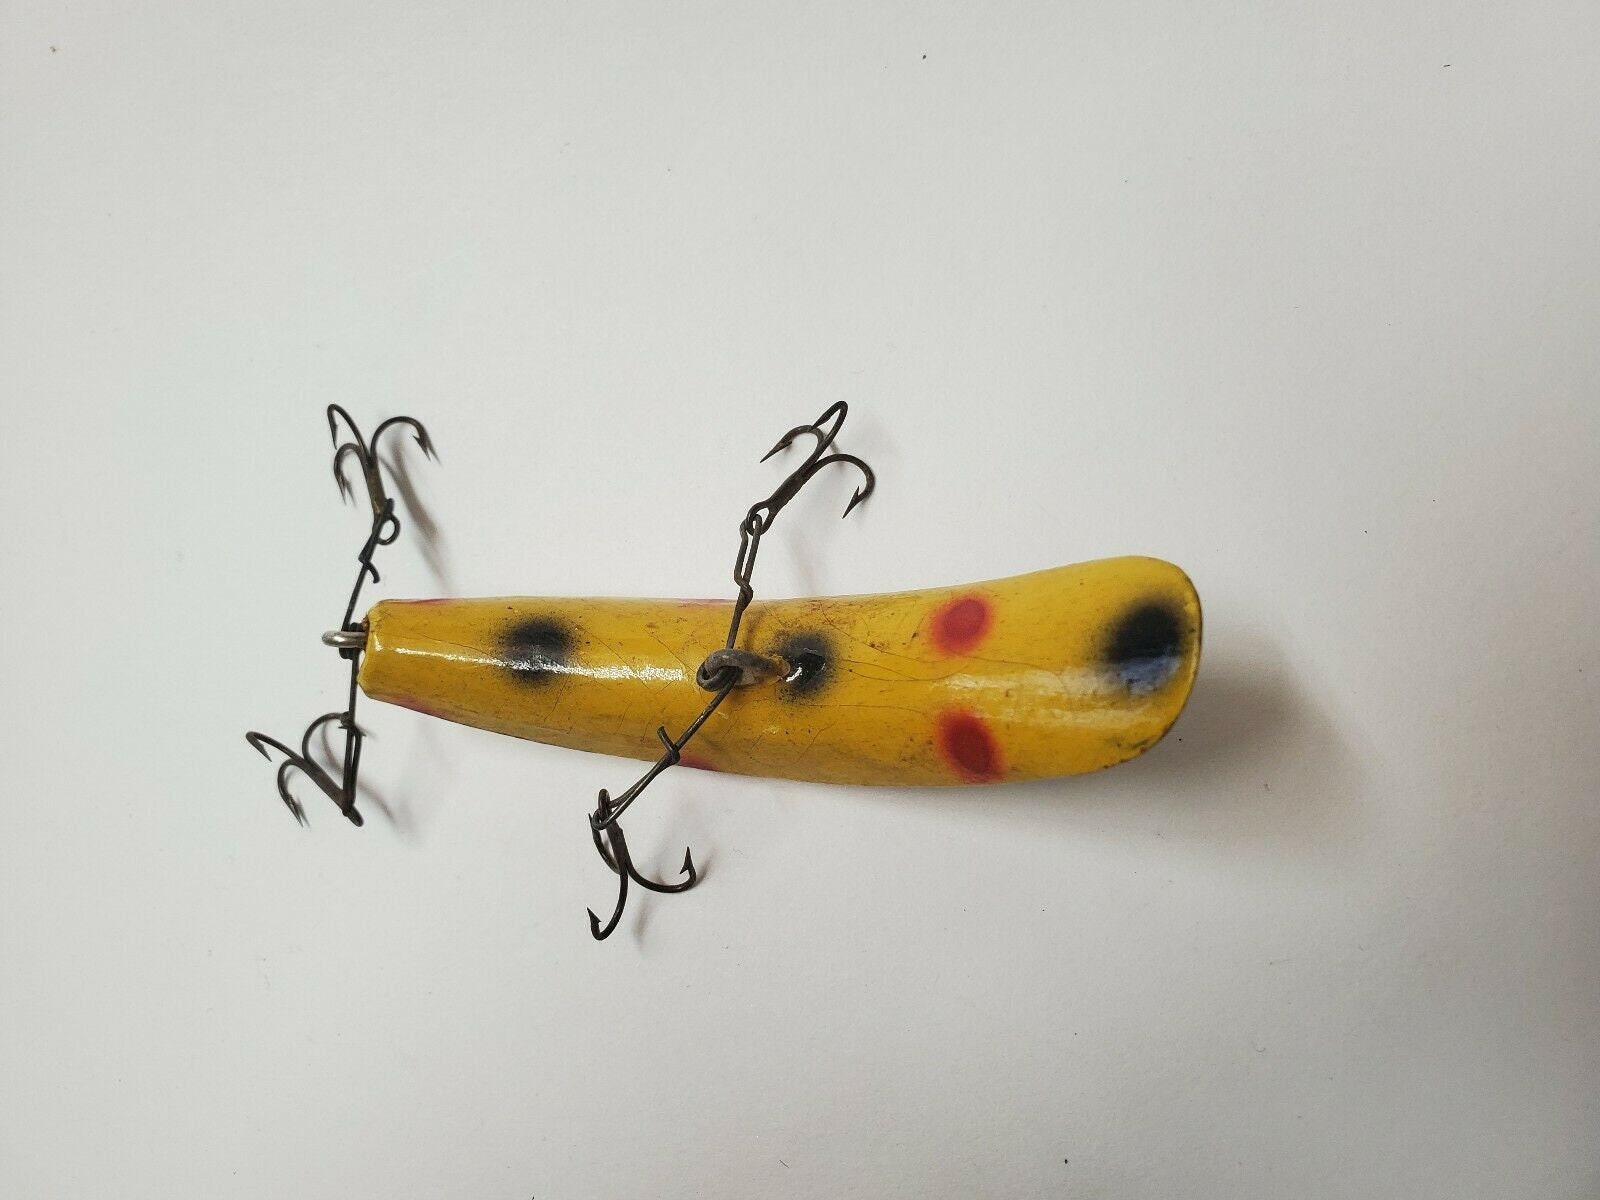 VINTAGE WOODEN FISHING Lure Yellow Black & Rd Spotted Double Hooks Fish  Lure Antique Collectible Sporting Goods Lure -  Singapore